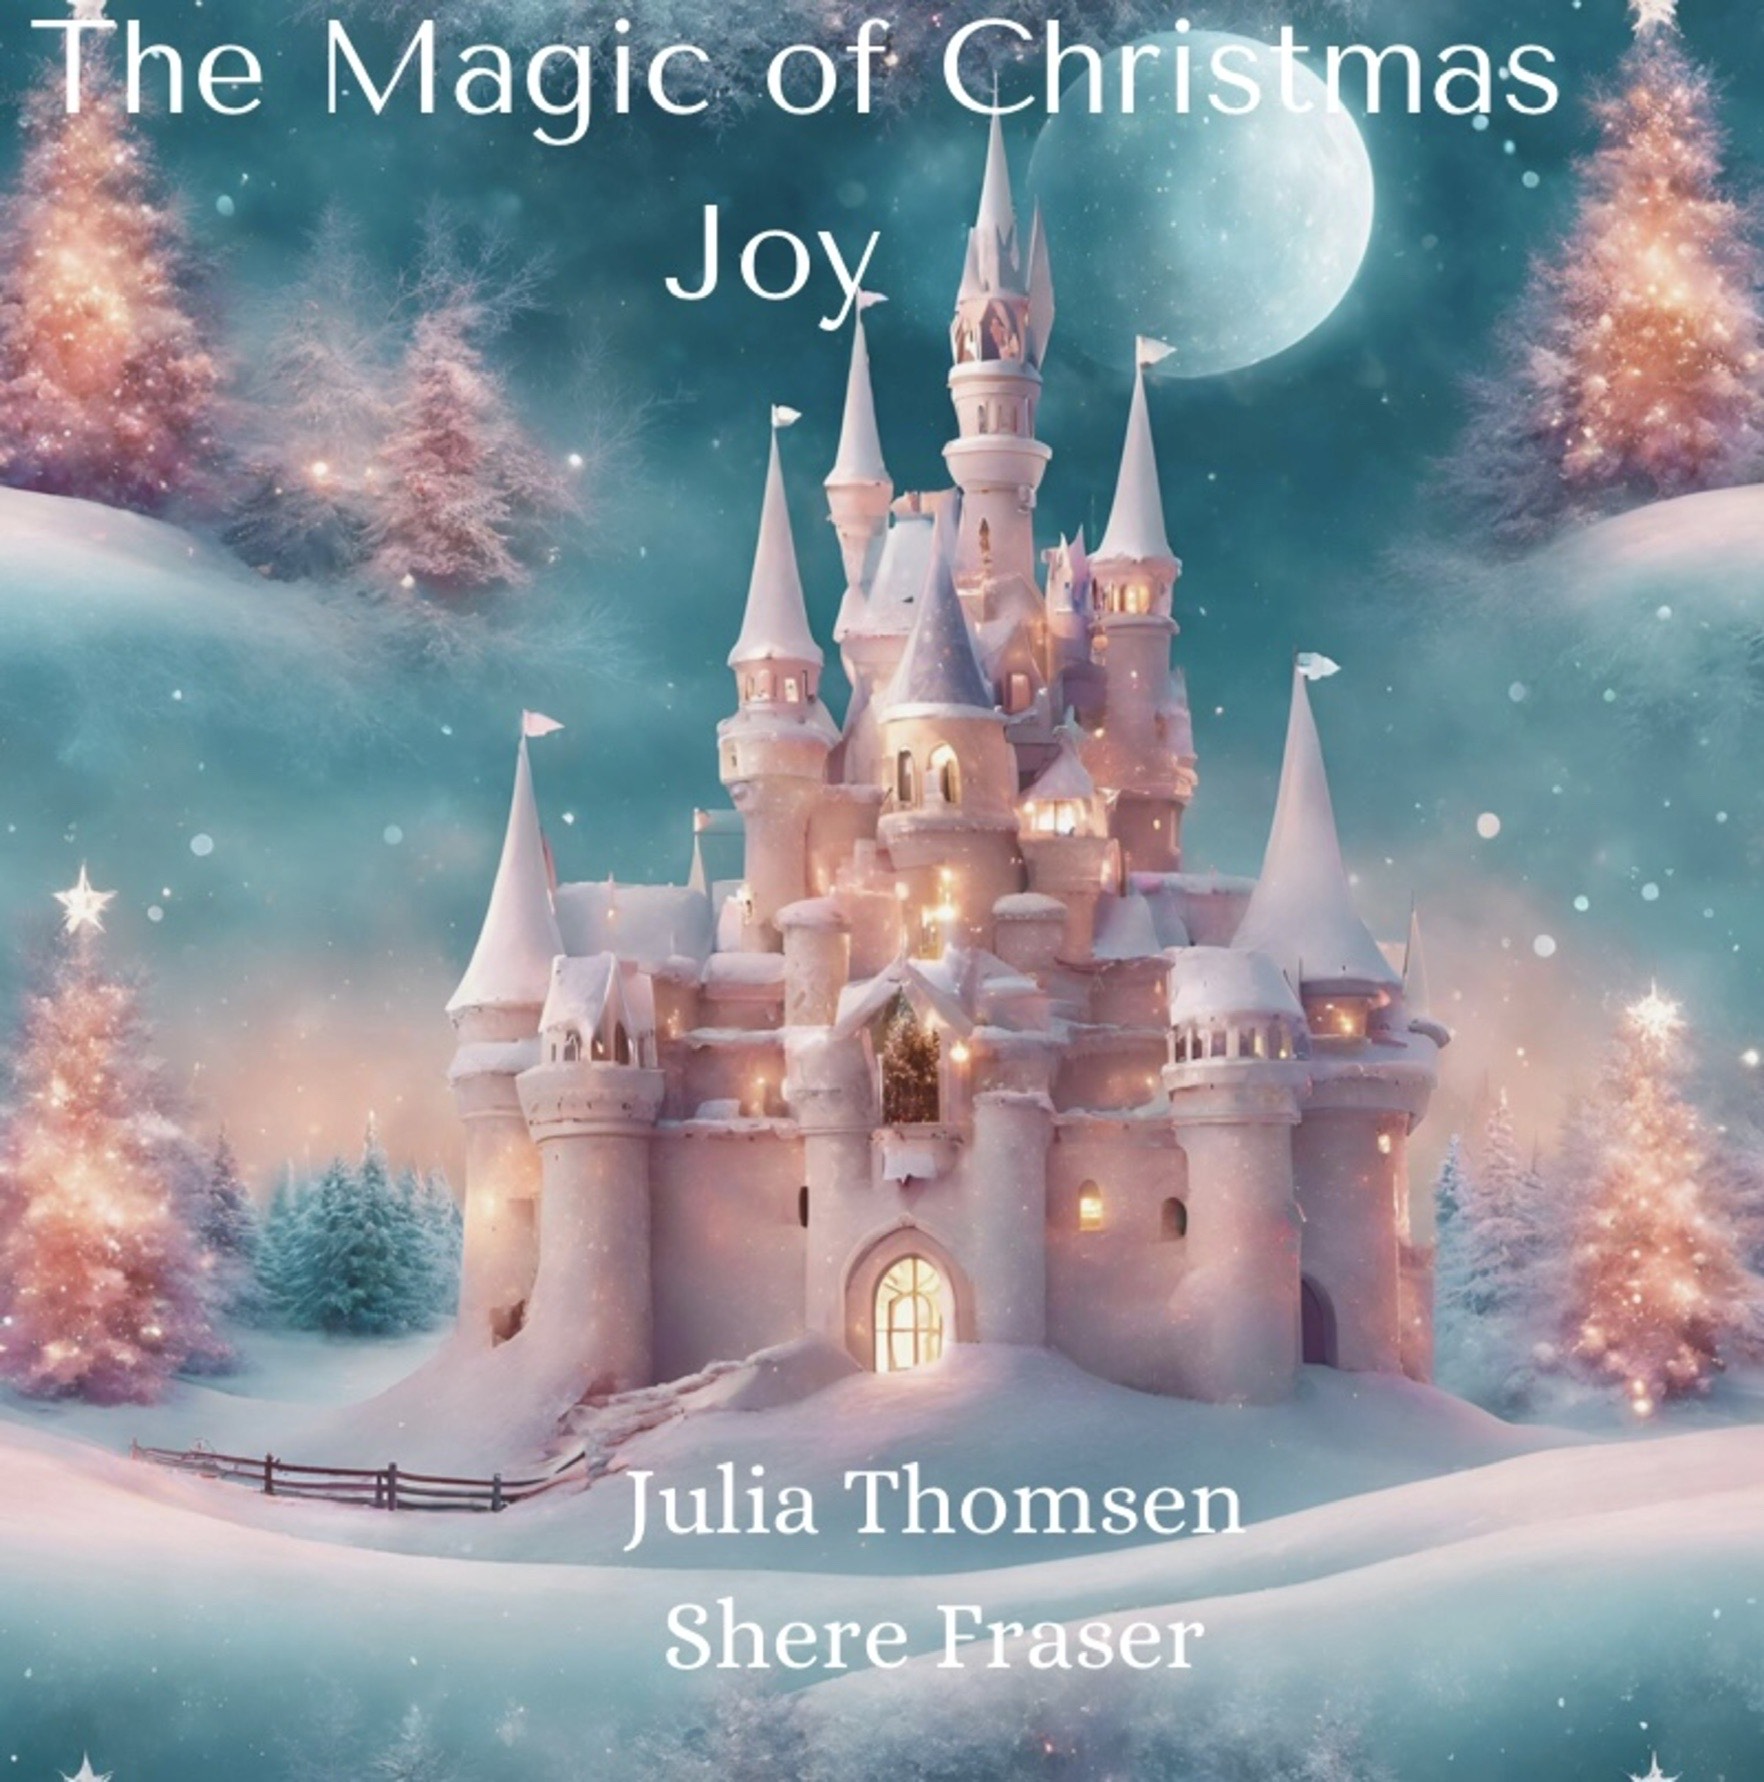 Julia Thomsen And Shere Fraser Team Up For Festive Composition ‘The Magic Of Christmas Joy’